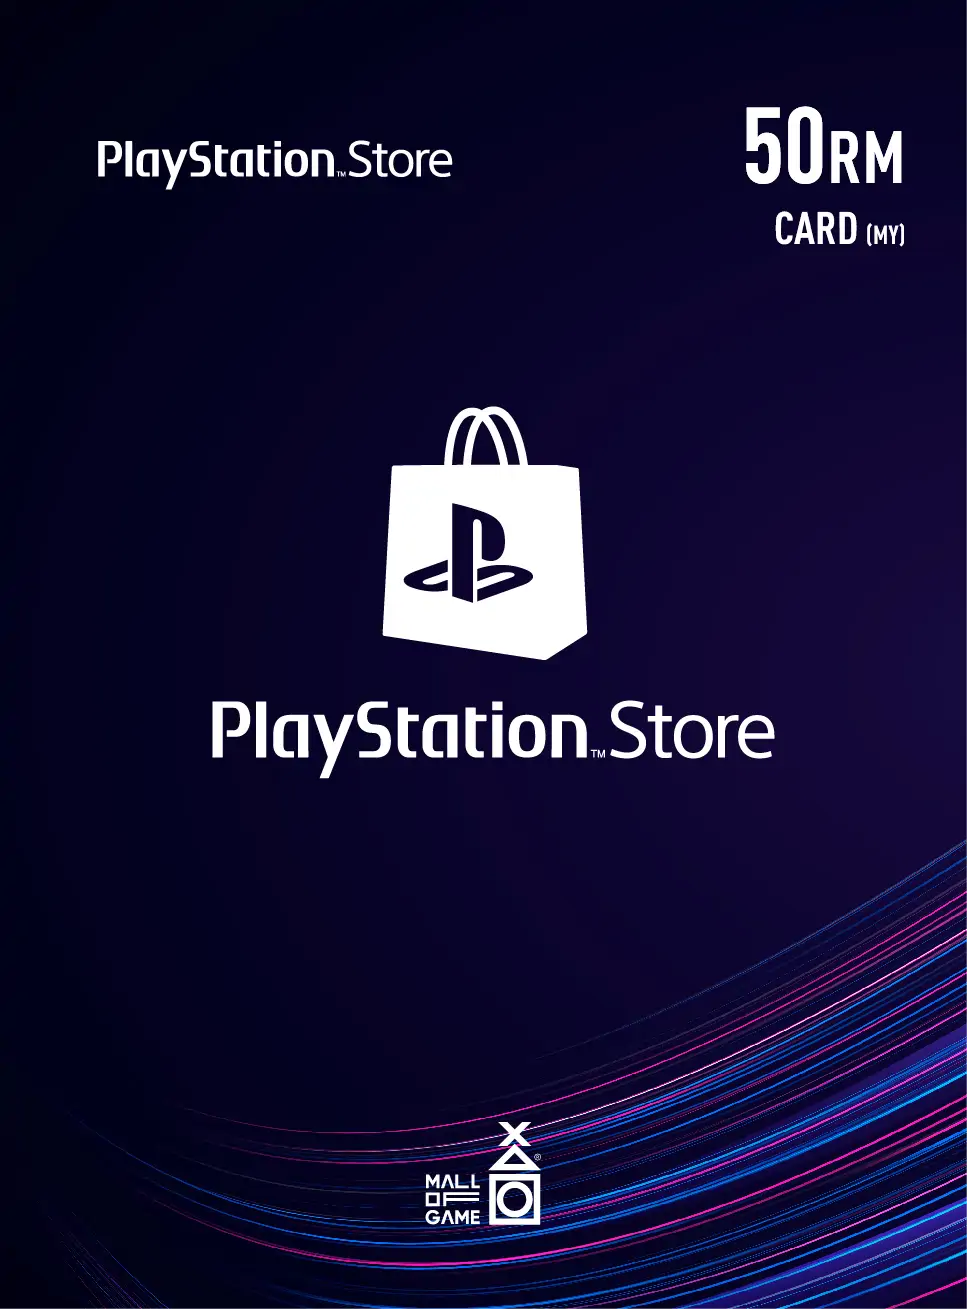 PlayStation™Store RM50 Cards (MY)